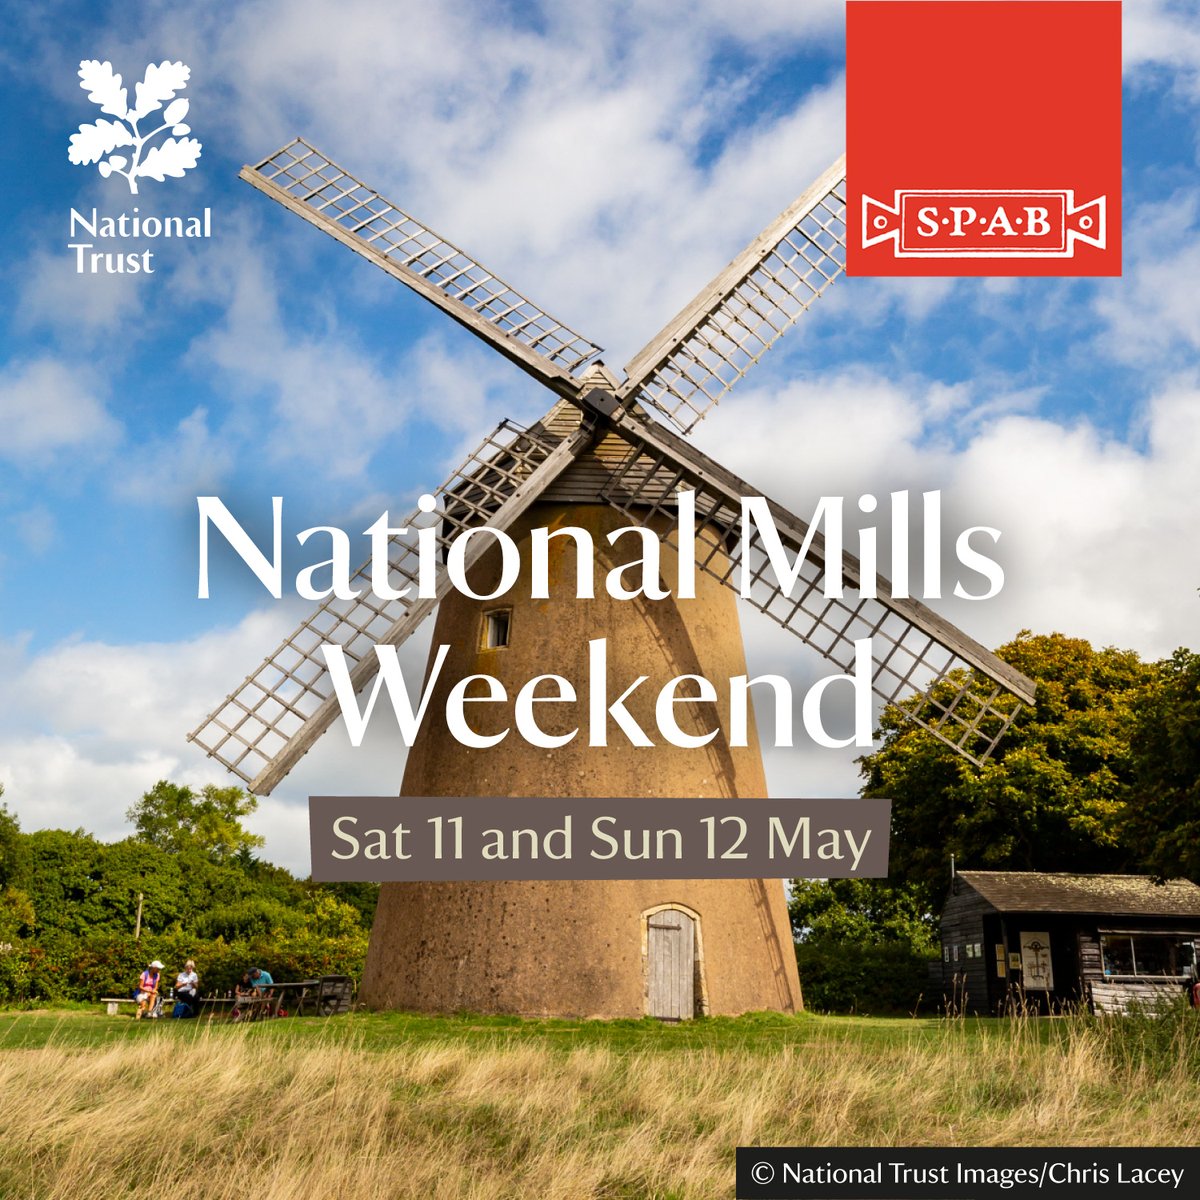 To celebrate @SPAB1877 #NationalMillsWeekend, #BembridgeWindmill will be open both Saturday and Sunday this weekend (10.30am-5pm). Not only is it the last surviving windmill on the #IOW but it also has much of its original machinery. Plan a visit here: bit.ly/NTIOWBW